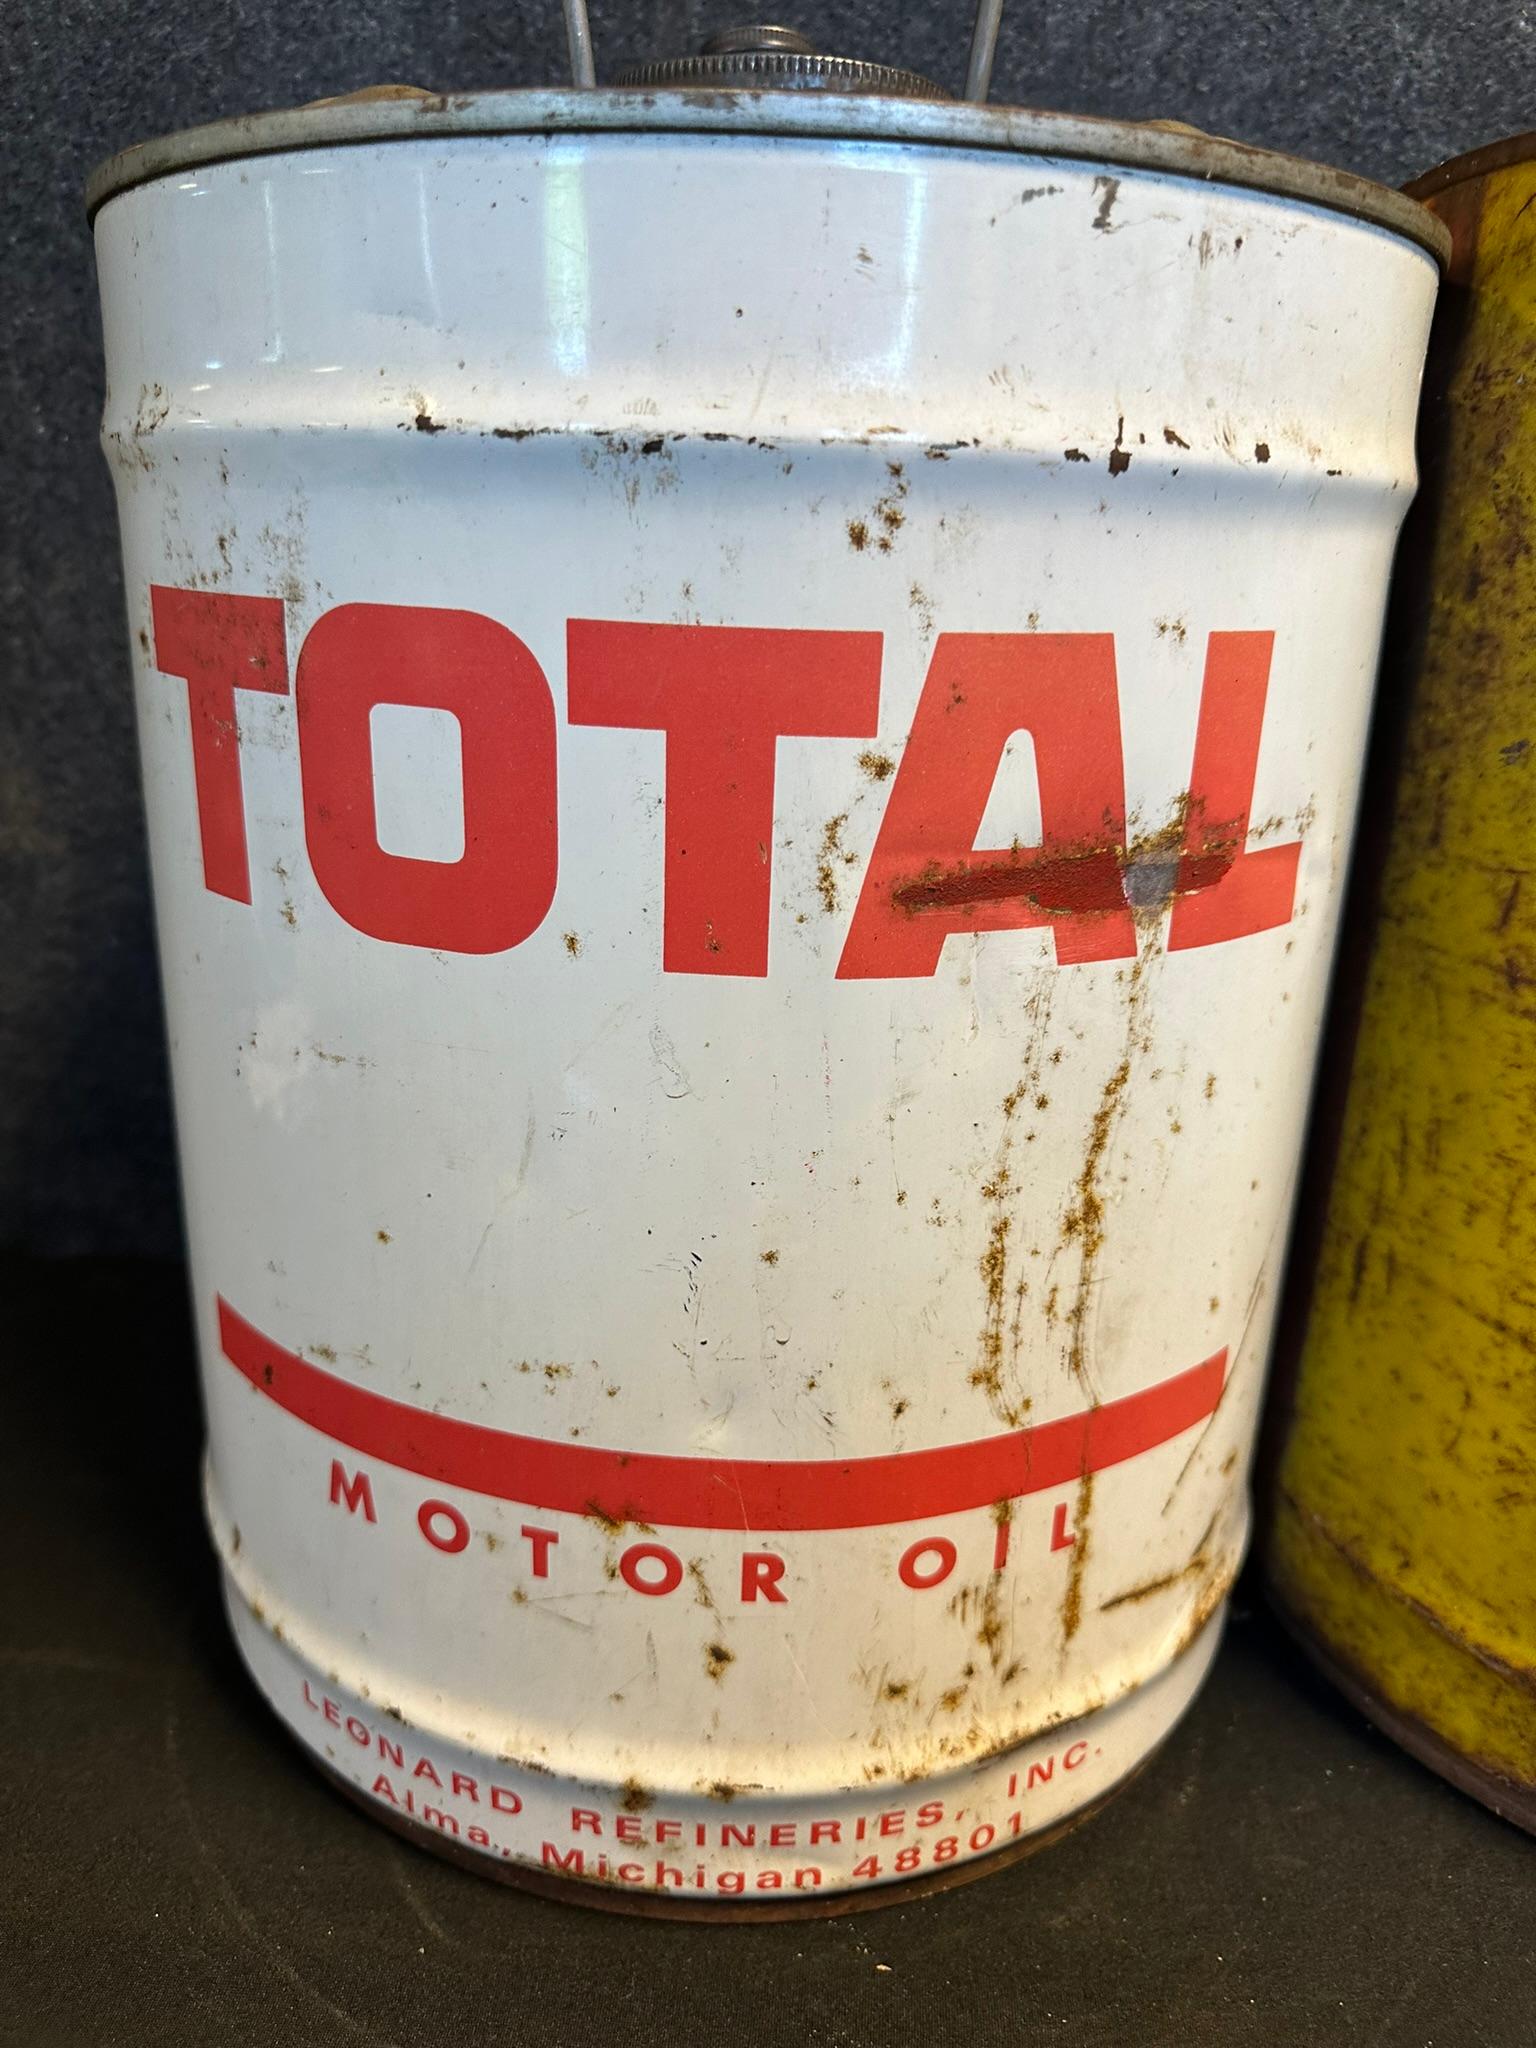 Total, Pennzoil & Reeves Lot of 3 5 Gallon Motor Oil Cans